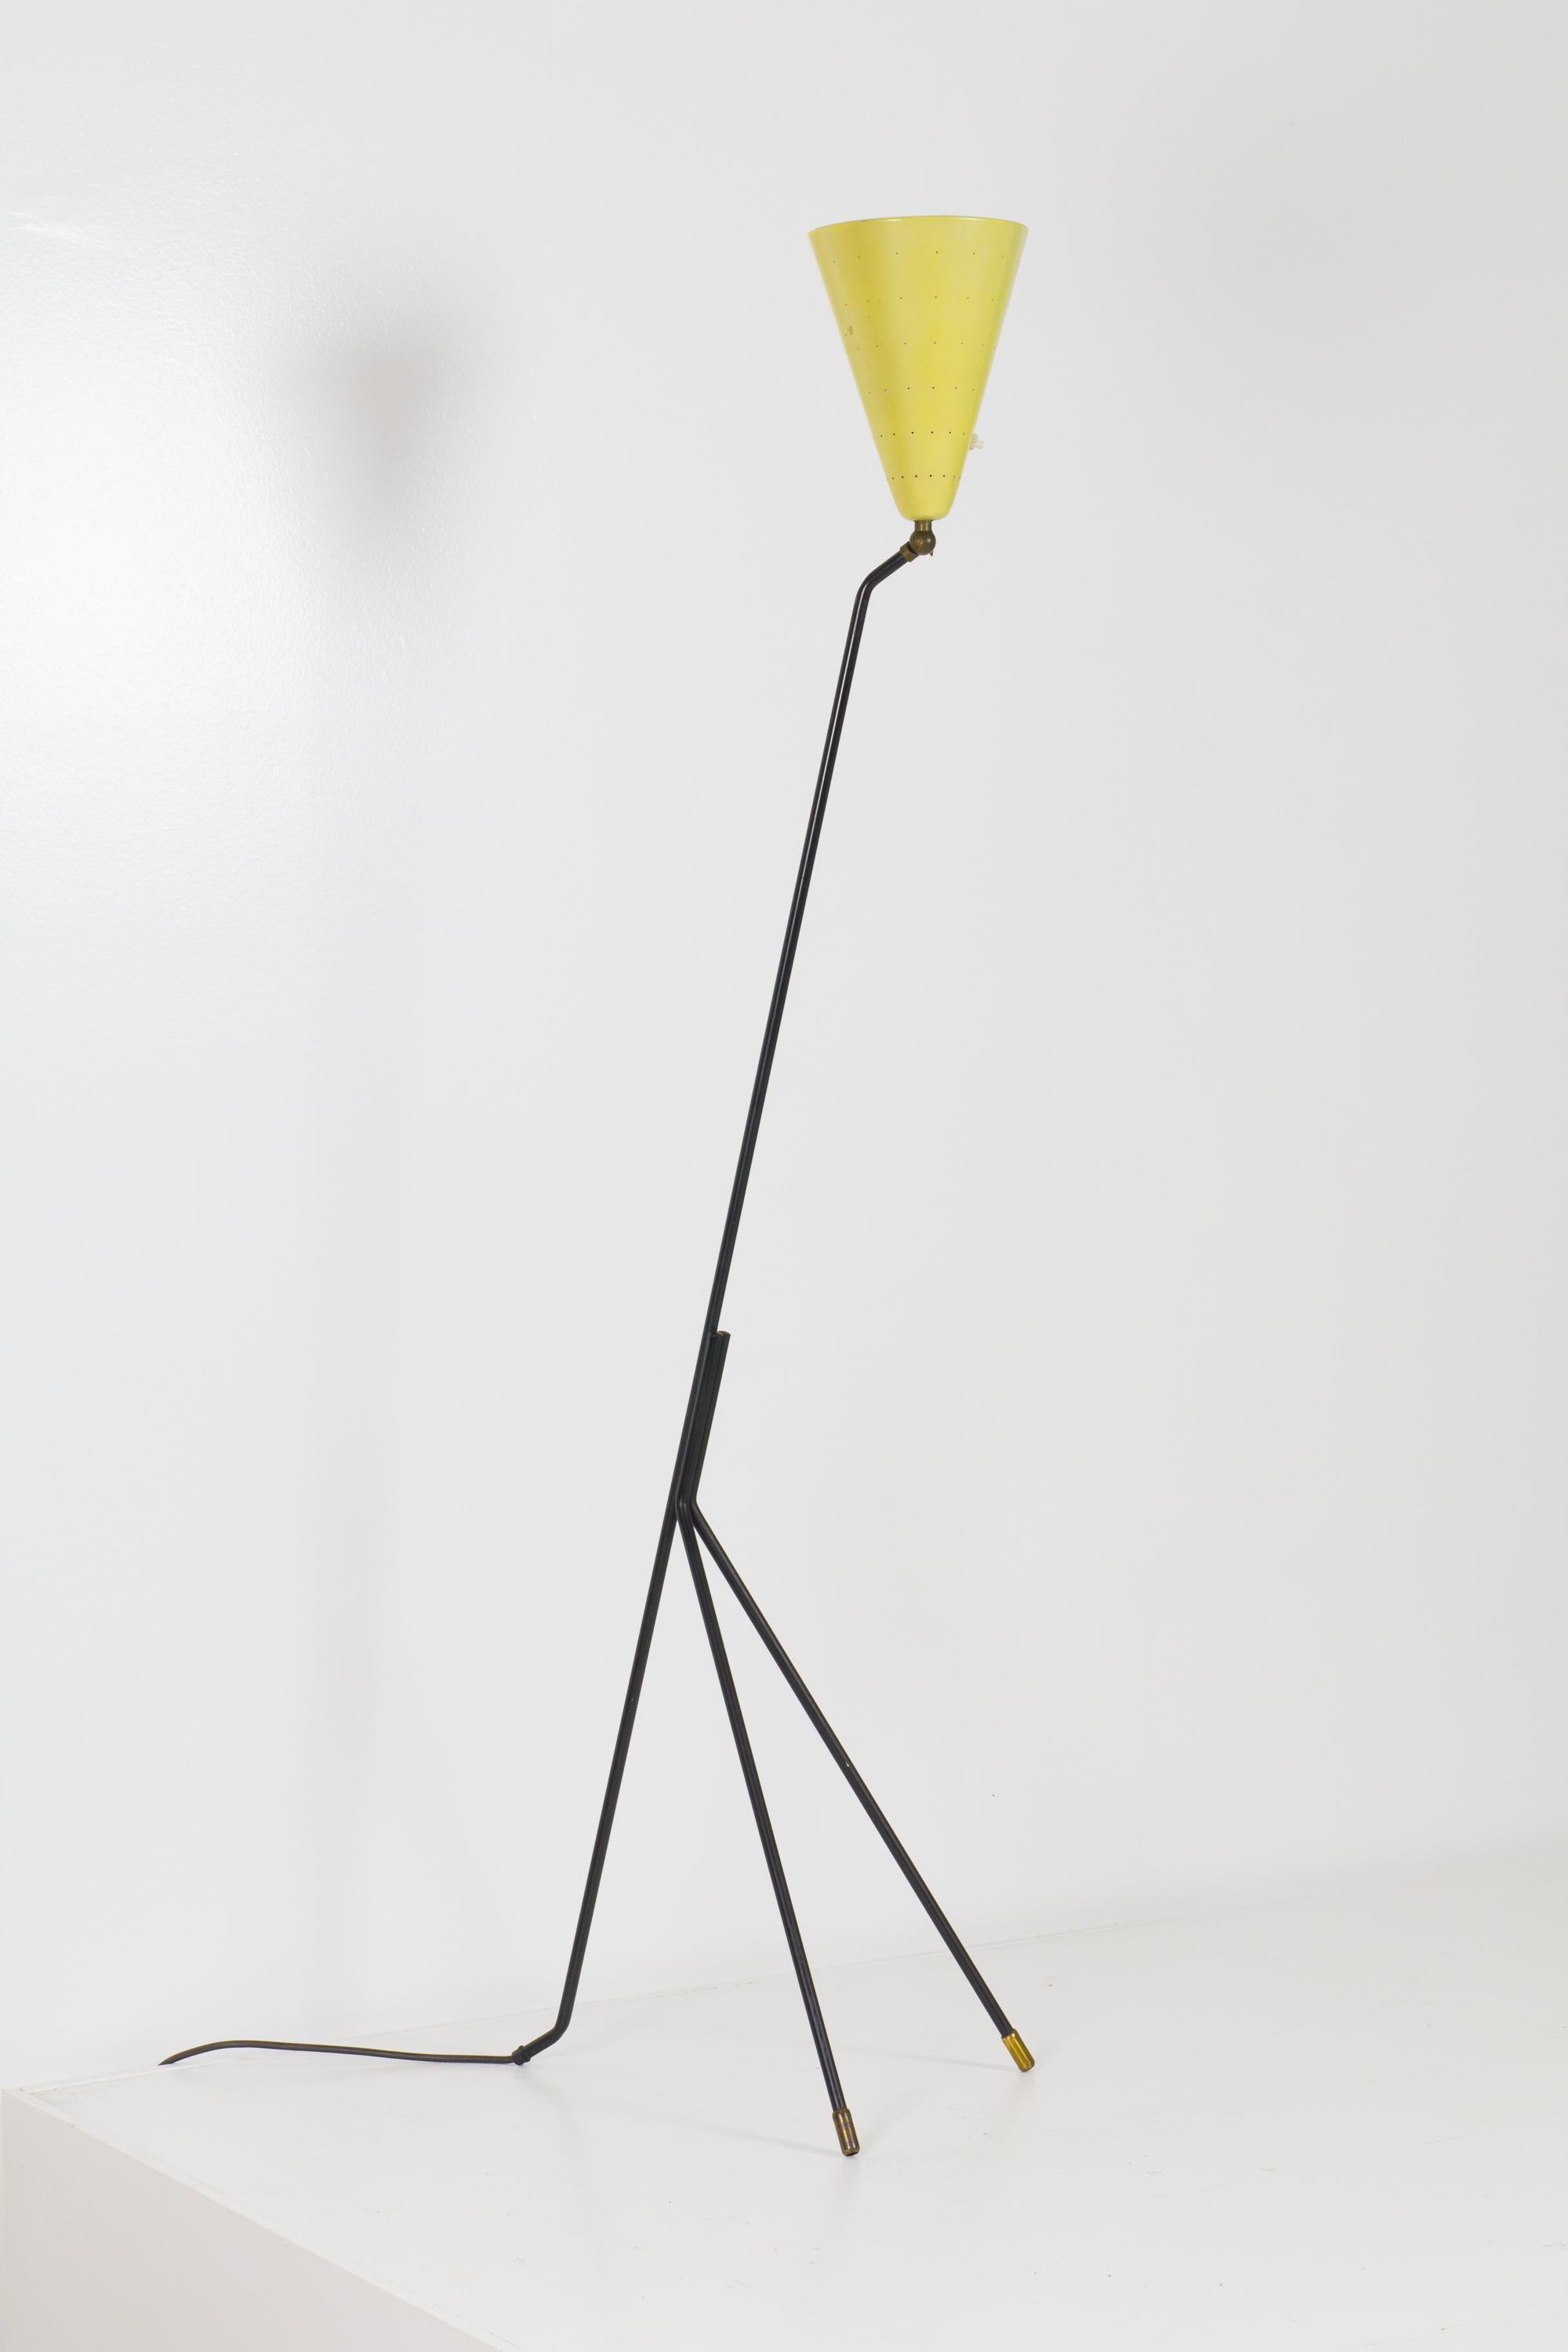 Giraffe style three-legged lamp with black powder coated steel legs and conical yellow perforated shade by Svend Aage Holm Sorensen. Shade can be tilted upwards for use as a torchiere or downward for reading.